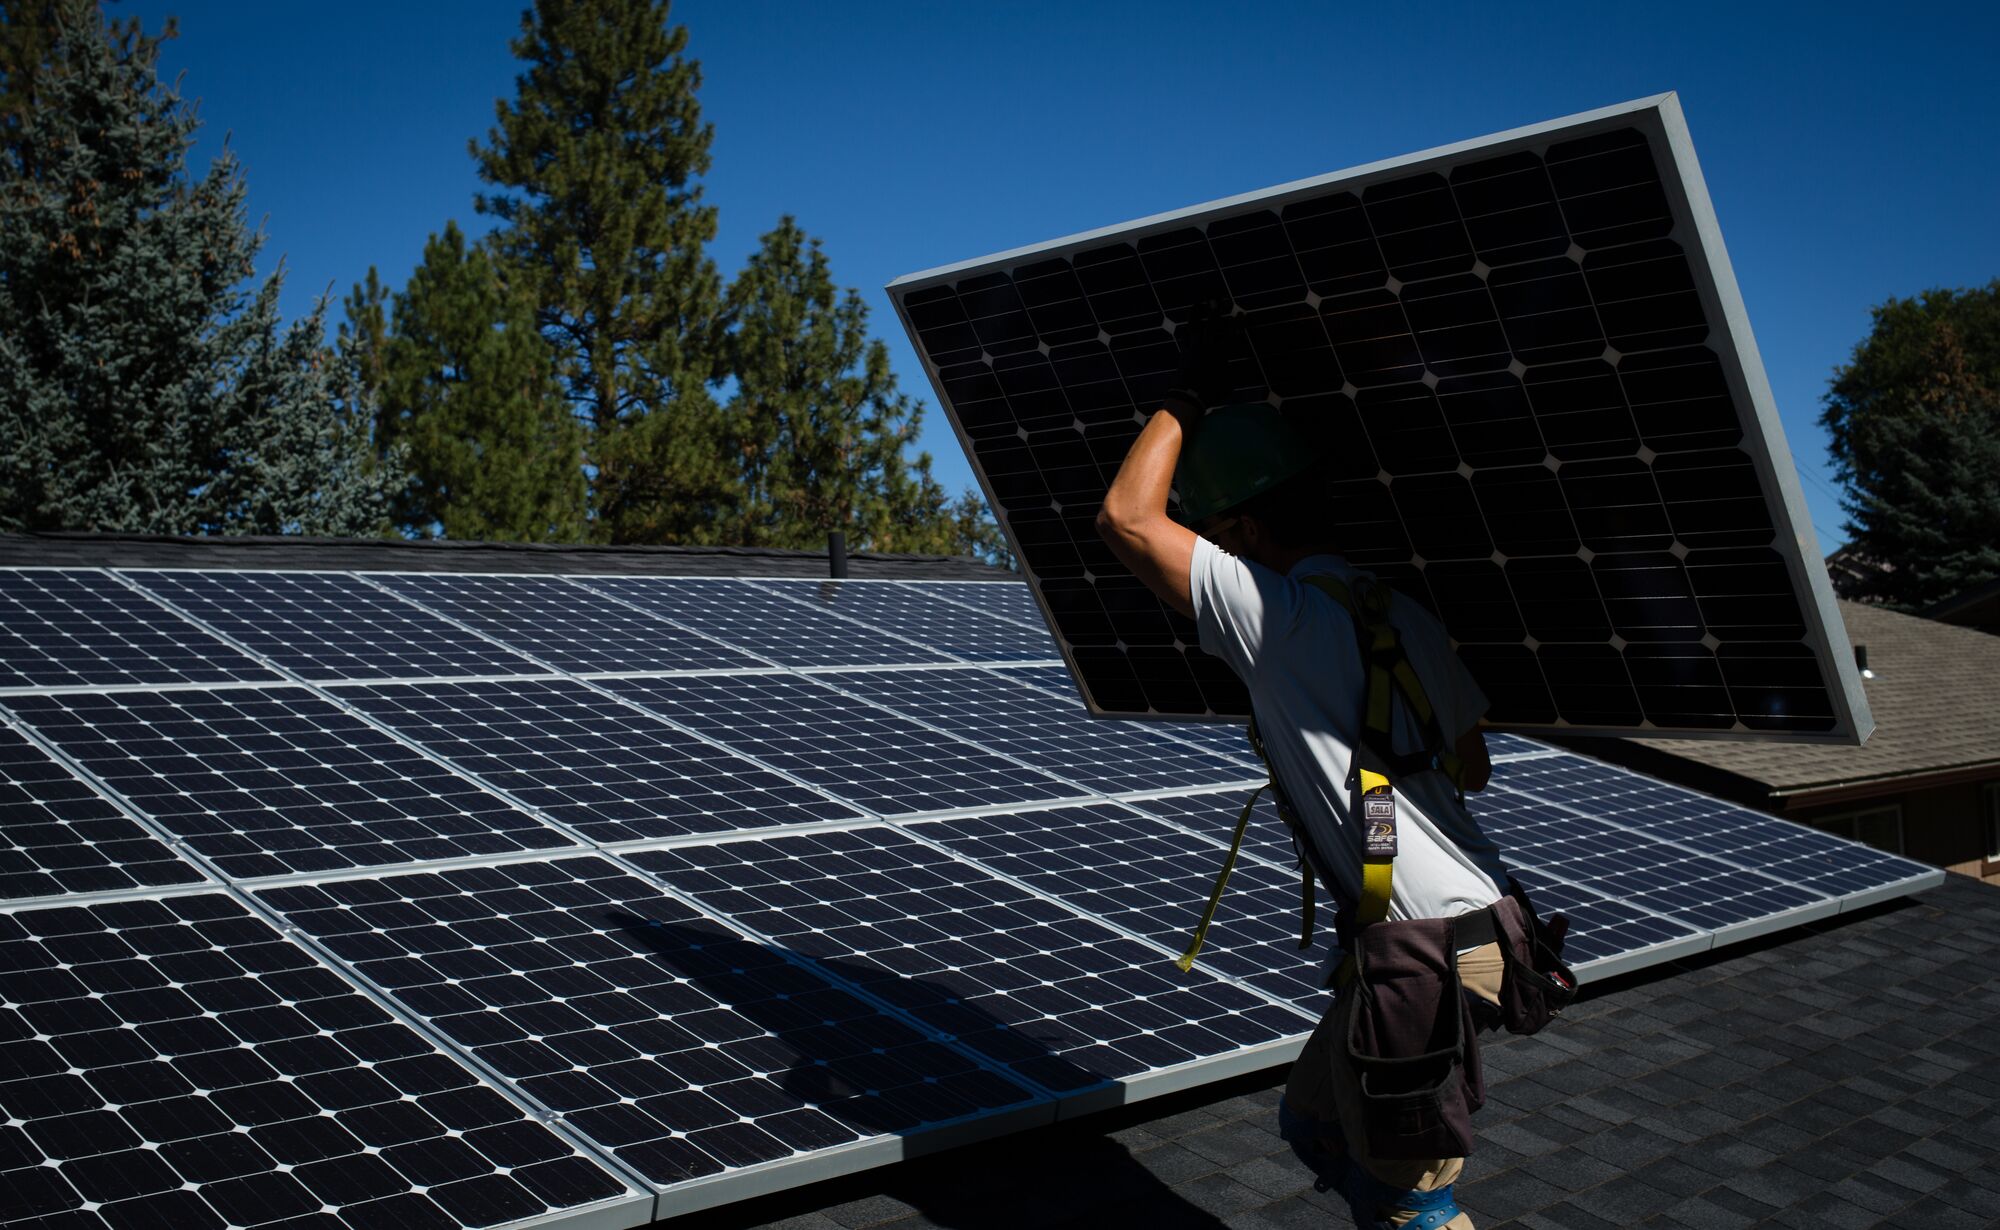 Workers for EcoDepot Inc. install solar panels on a roof in Spokane, Washington.